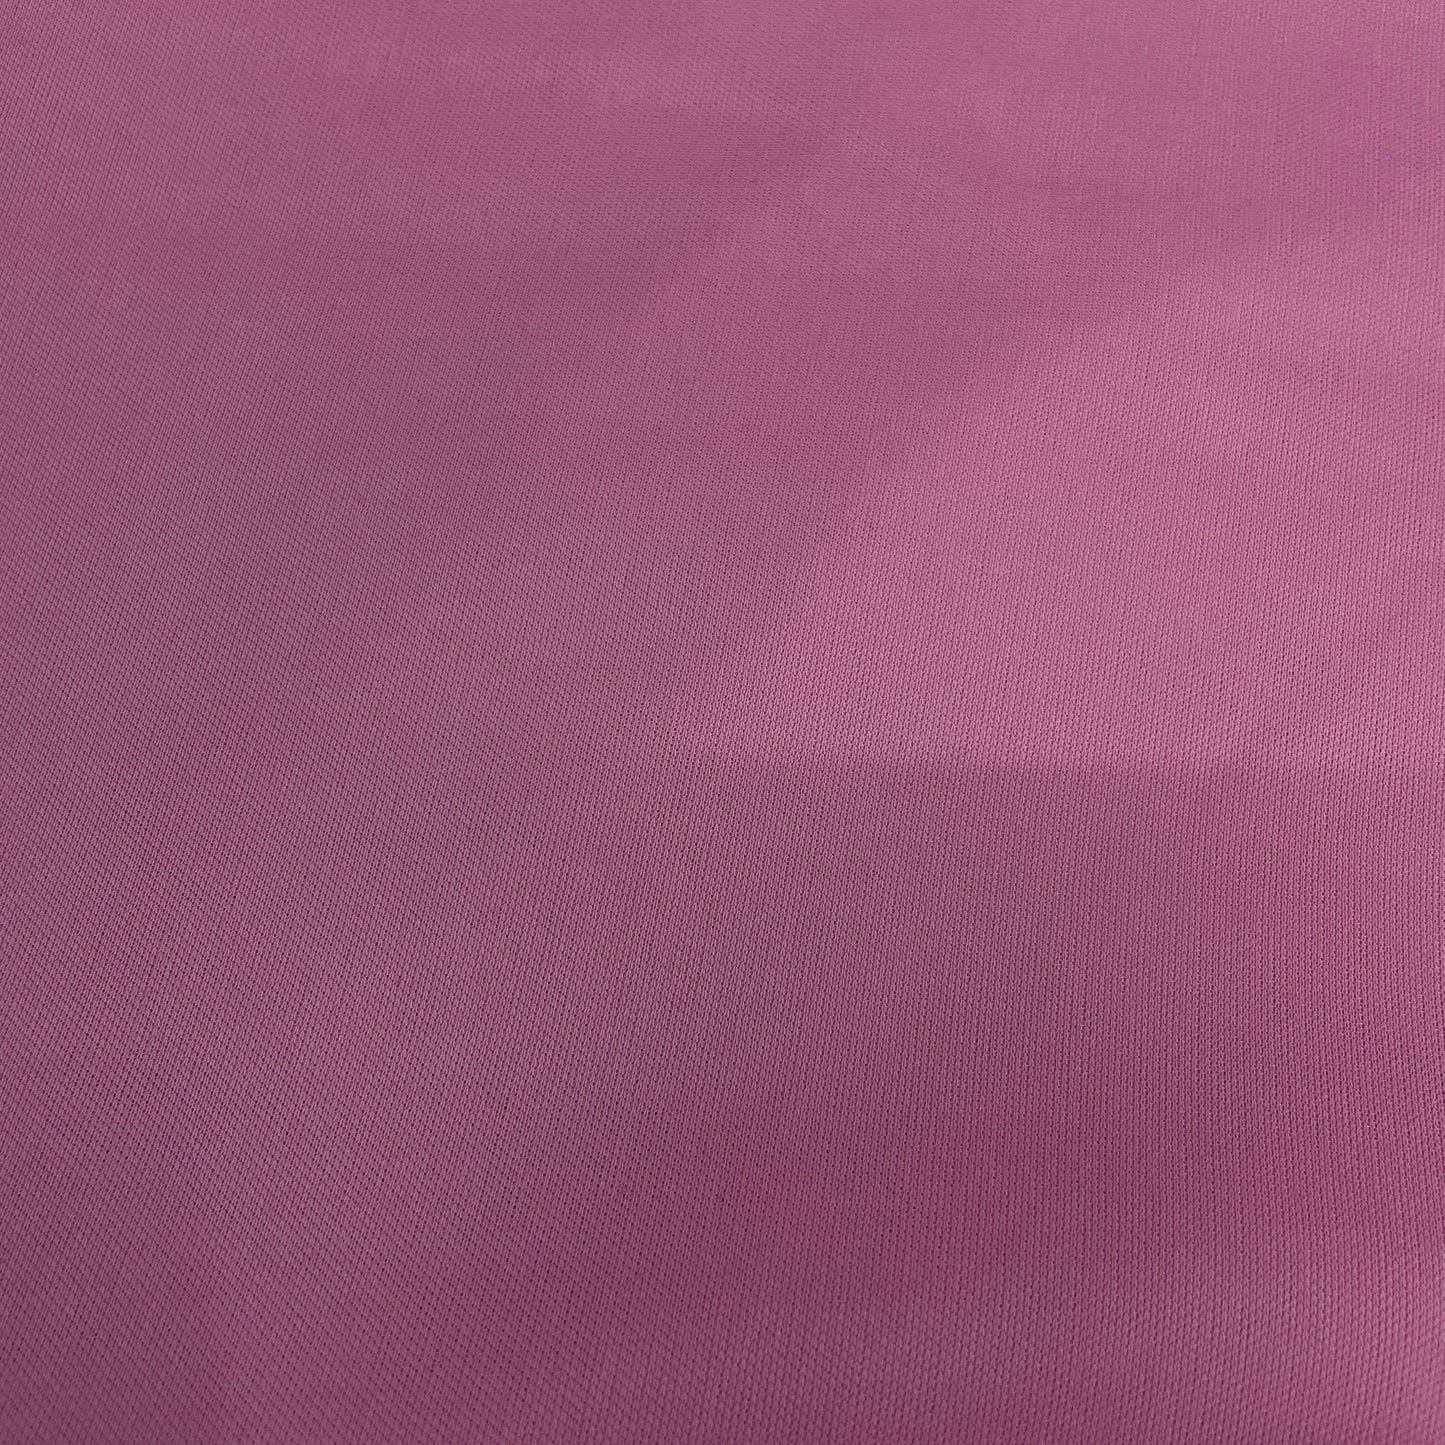 Rose Pink Solid Lycra Fabric